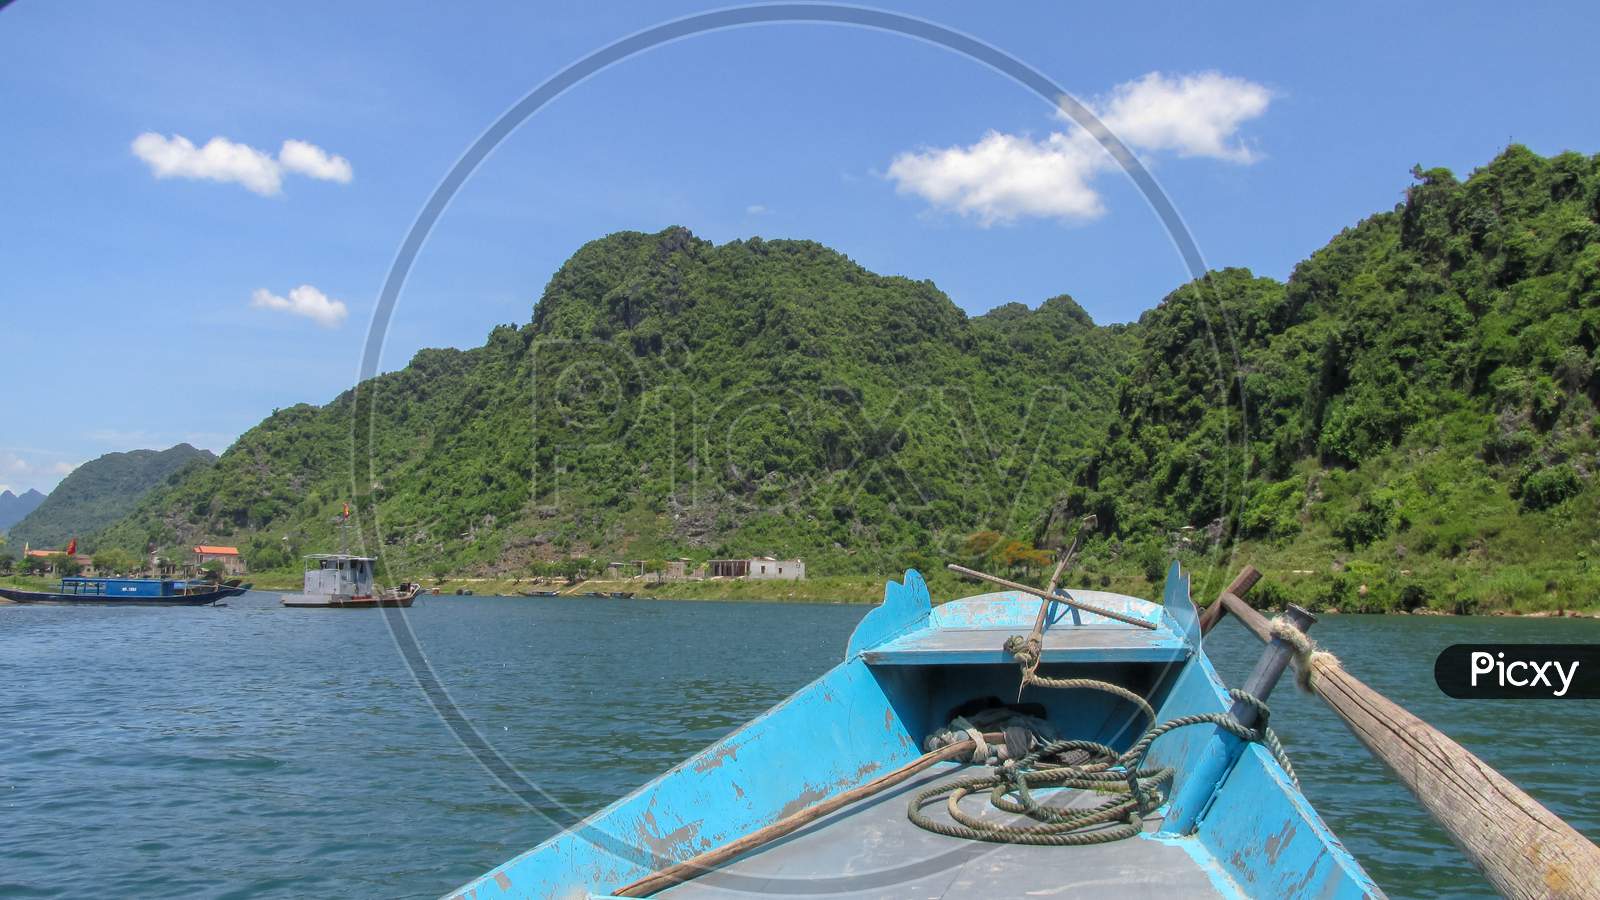 Looking At The Blue River And High Mountain From The Bow Of A Small Wooden Boat In Phong Nha - Ke Bang National Park, Ninh Binh Province, Vietnam